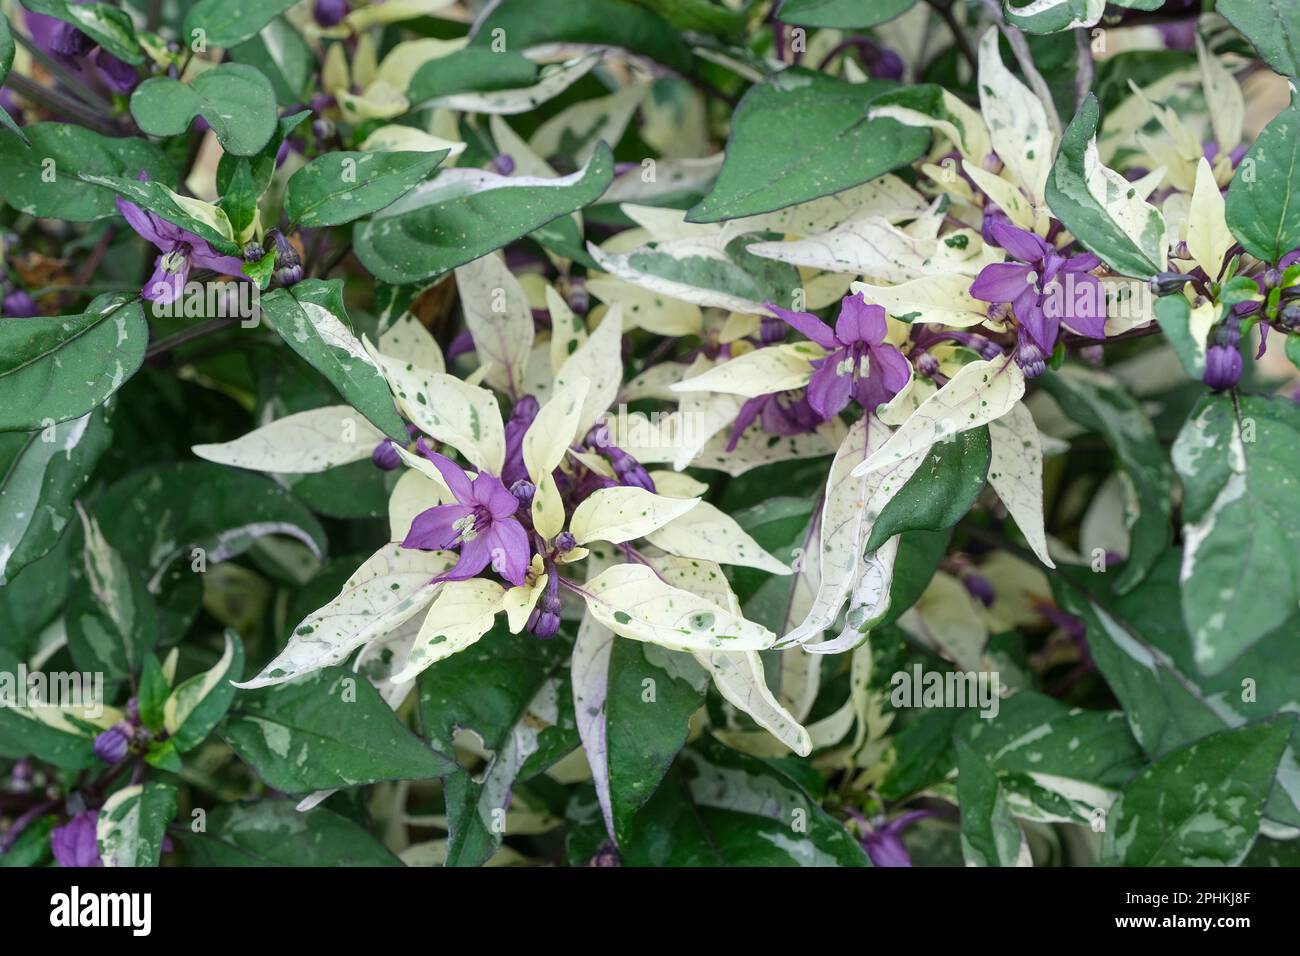 Ornamental pepper Calico, Capsicum annuum Calico, variegated green, purple and cream leaves, purple fruits that mature red Stock Photo